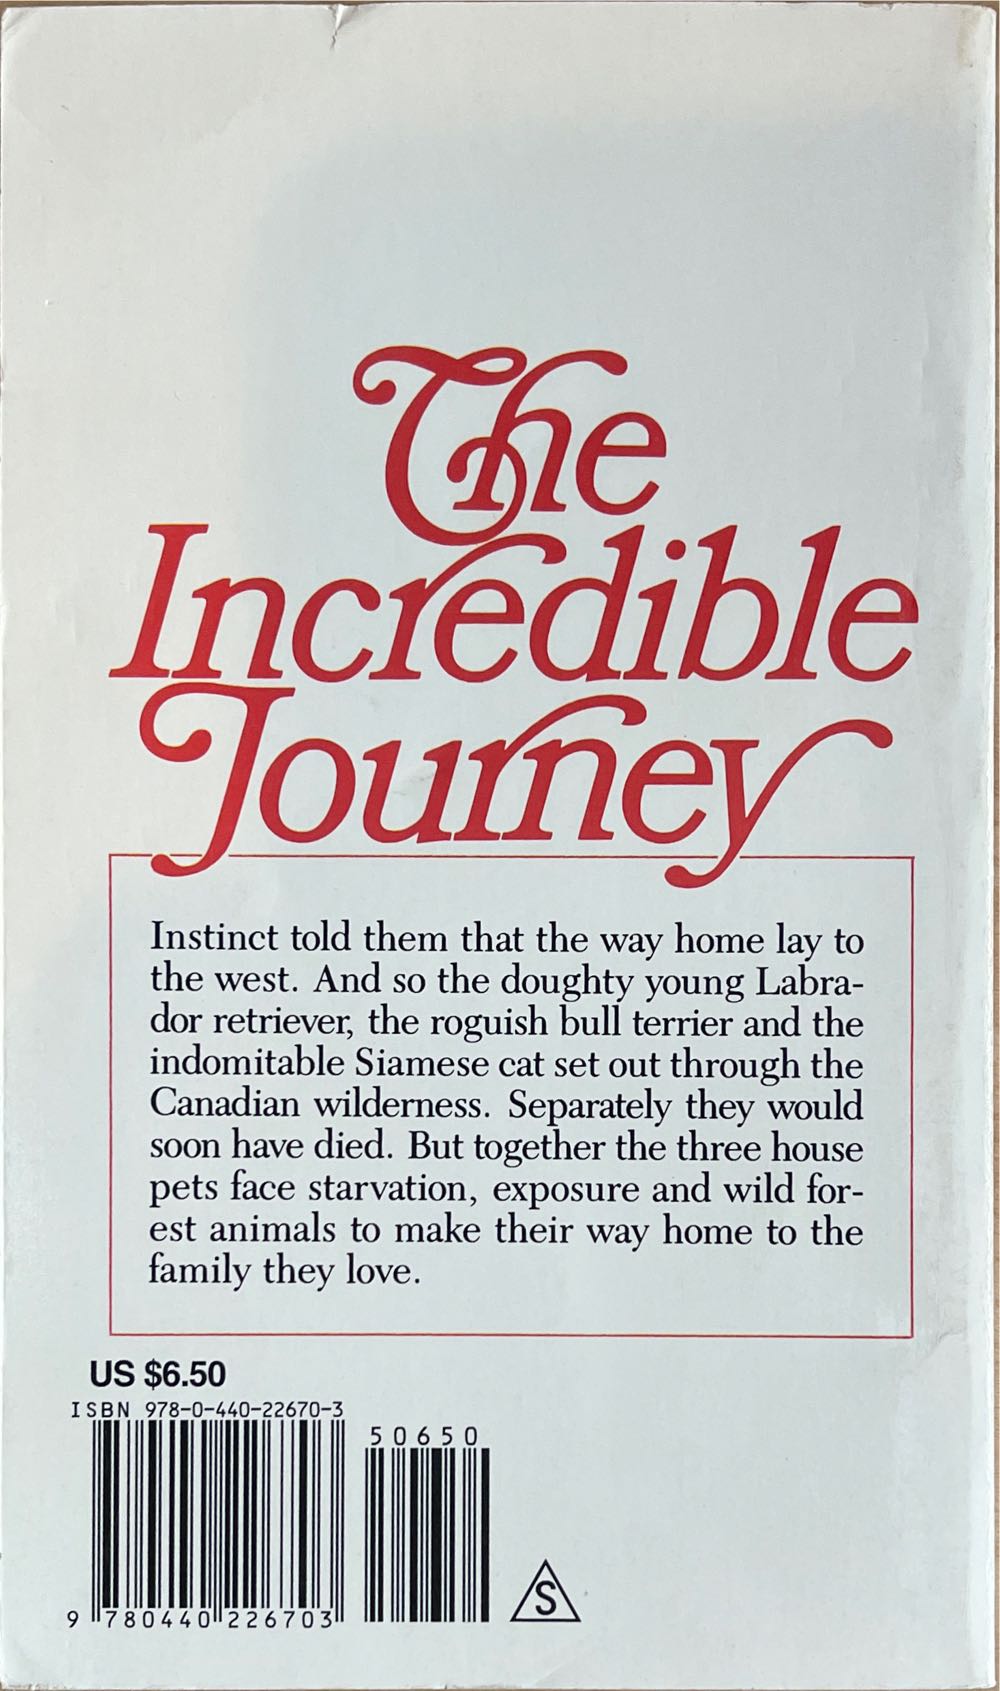 Incredible Journey, The - Sheila Burnford (Little, Brown - Paperback) book collectible [Barcode 9780440226703] - Main Image 2